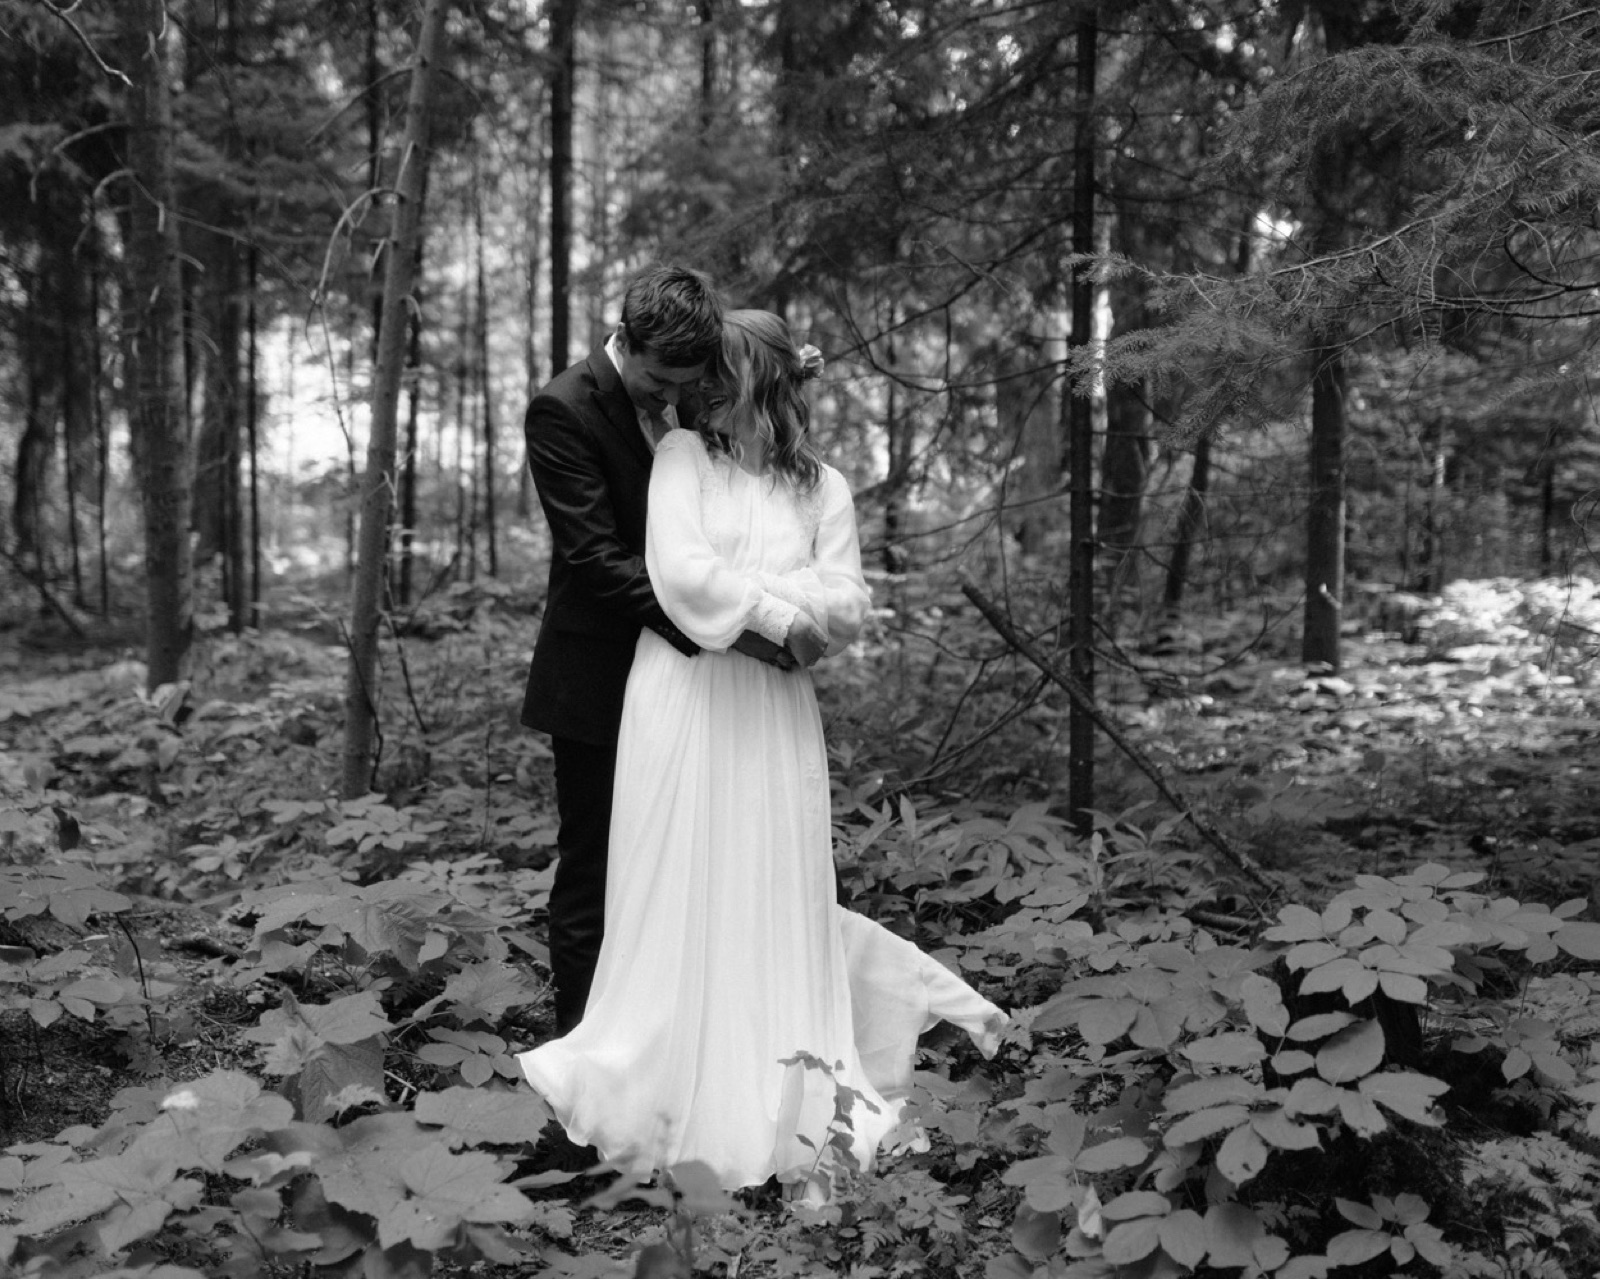 Classic black and white portraiture in a fern-laden forest in northern British Columbia